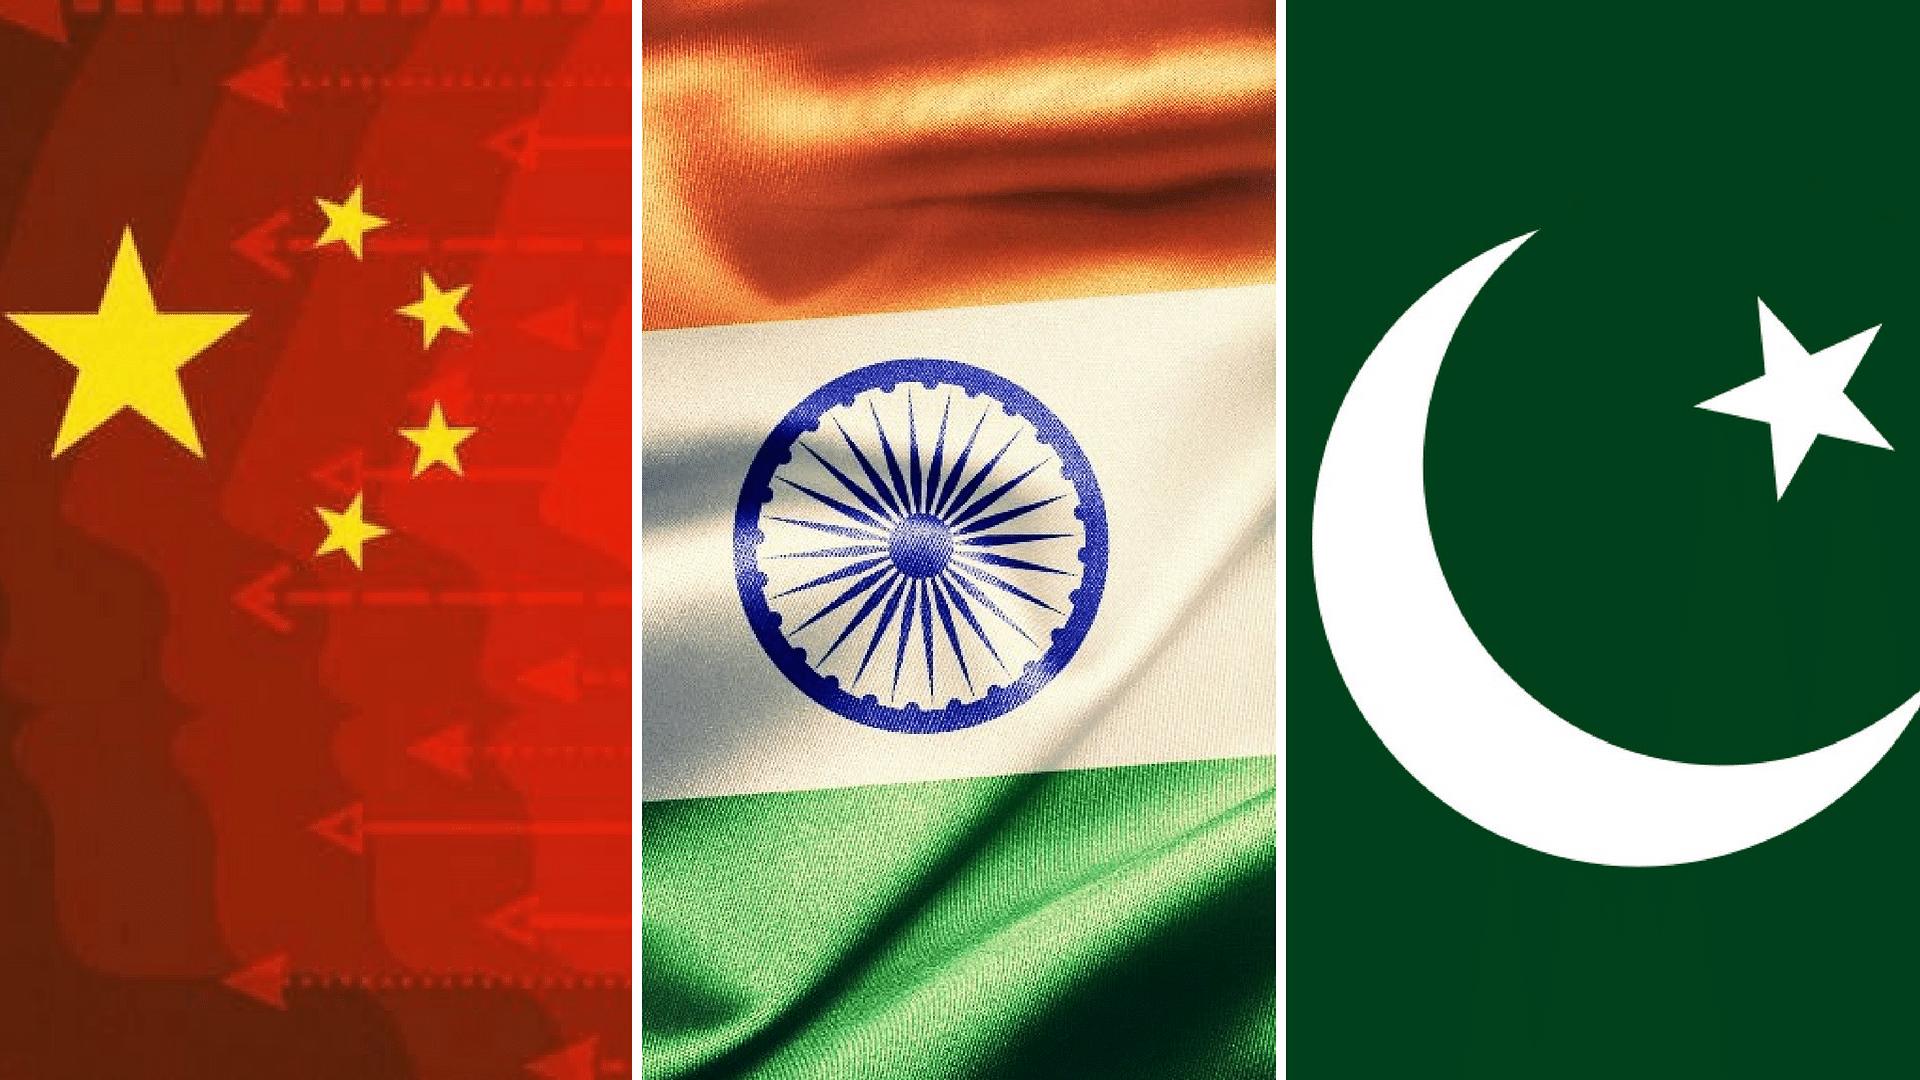 A stable bilateral relationship between India and Pakistan is essential to peace and stability in South Asia, China said.